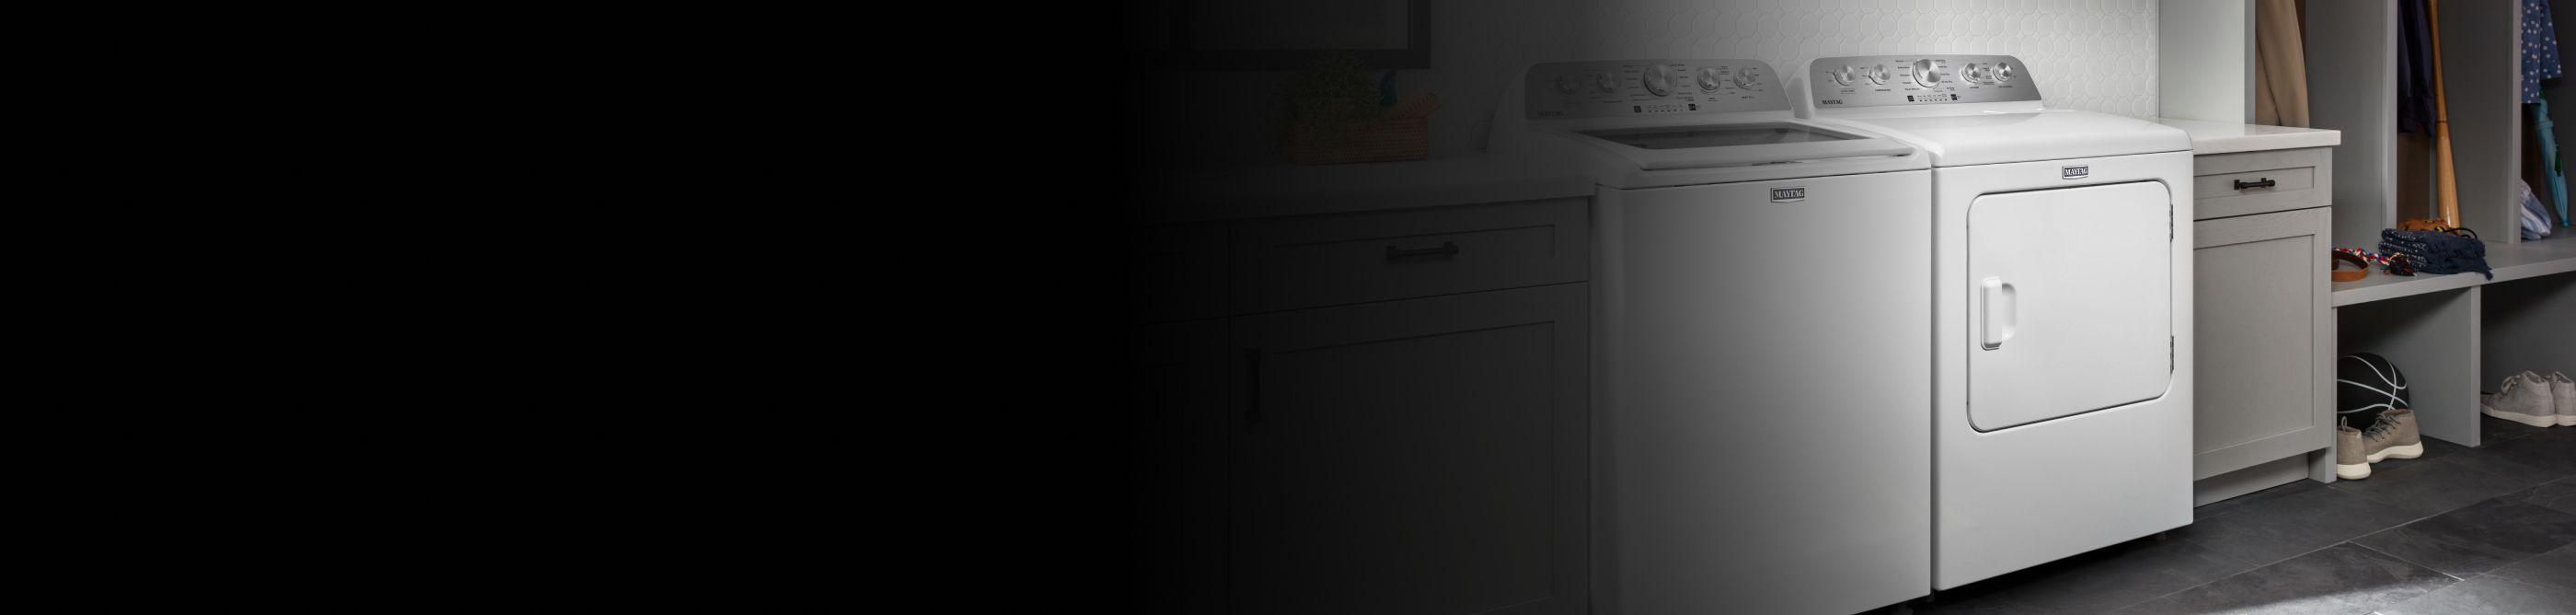 White Maytag® top load washer and front load dryer side by side in a laundry room next to shelves